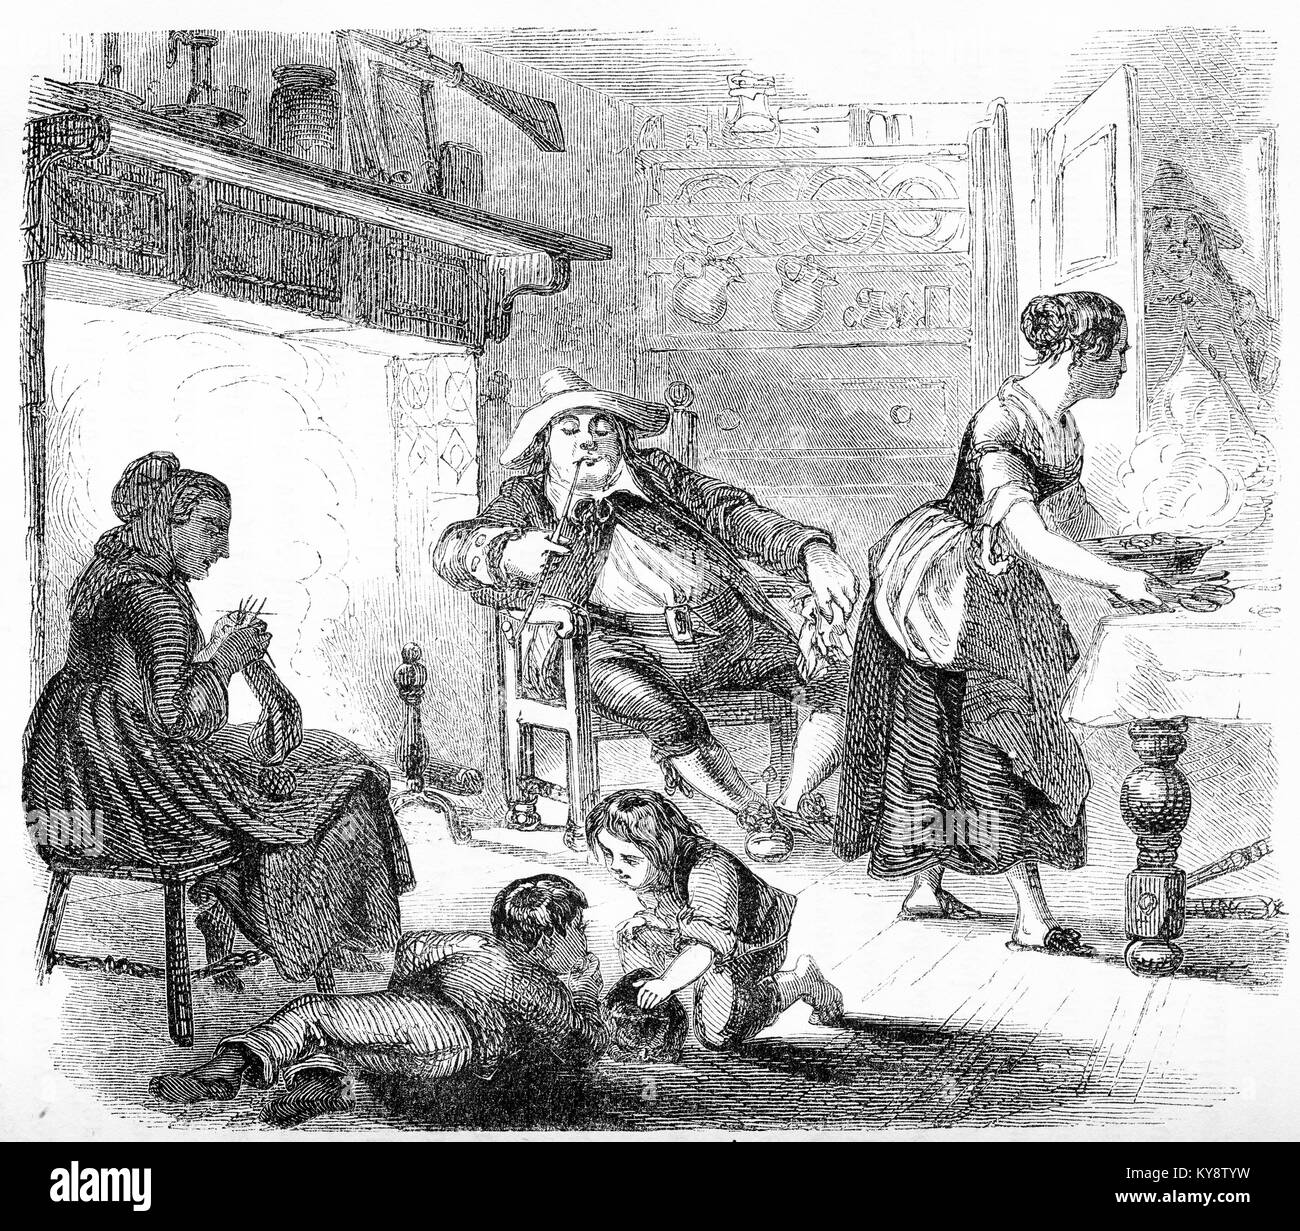 Engraving of a farming Dutchman and his family enjoying an evening at home. From an original engraving in the Harper's Story Books by Jacob Abbott, 1854. Stock Photo